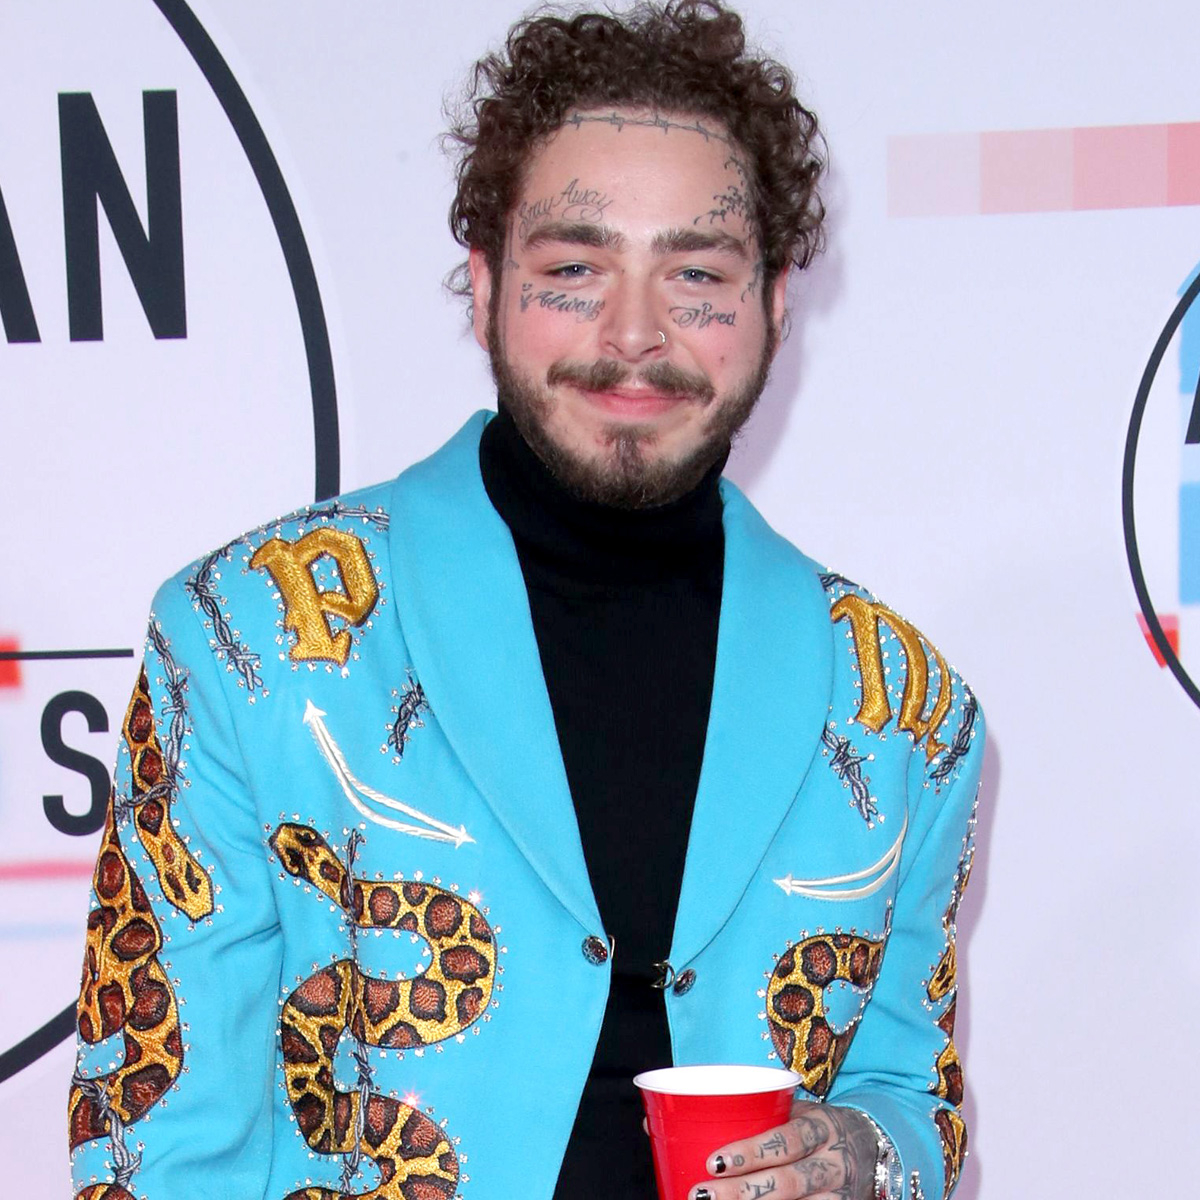 Post Malone Says Fiancée Helped Him After “Rough” Period With Alcohol